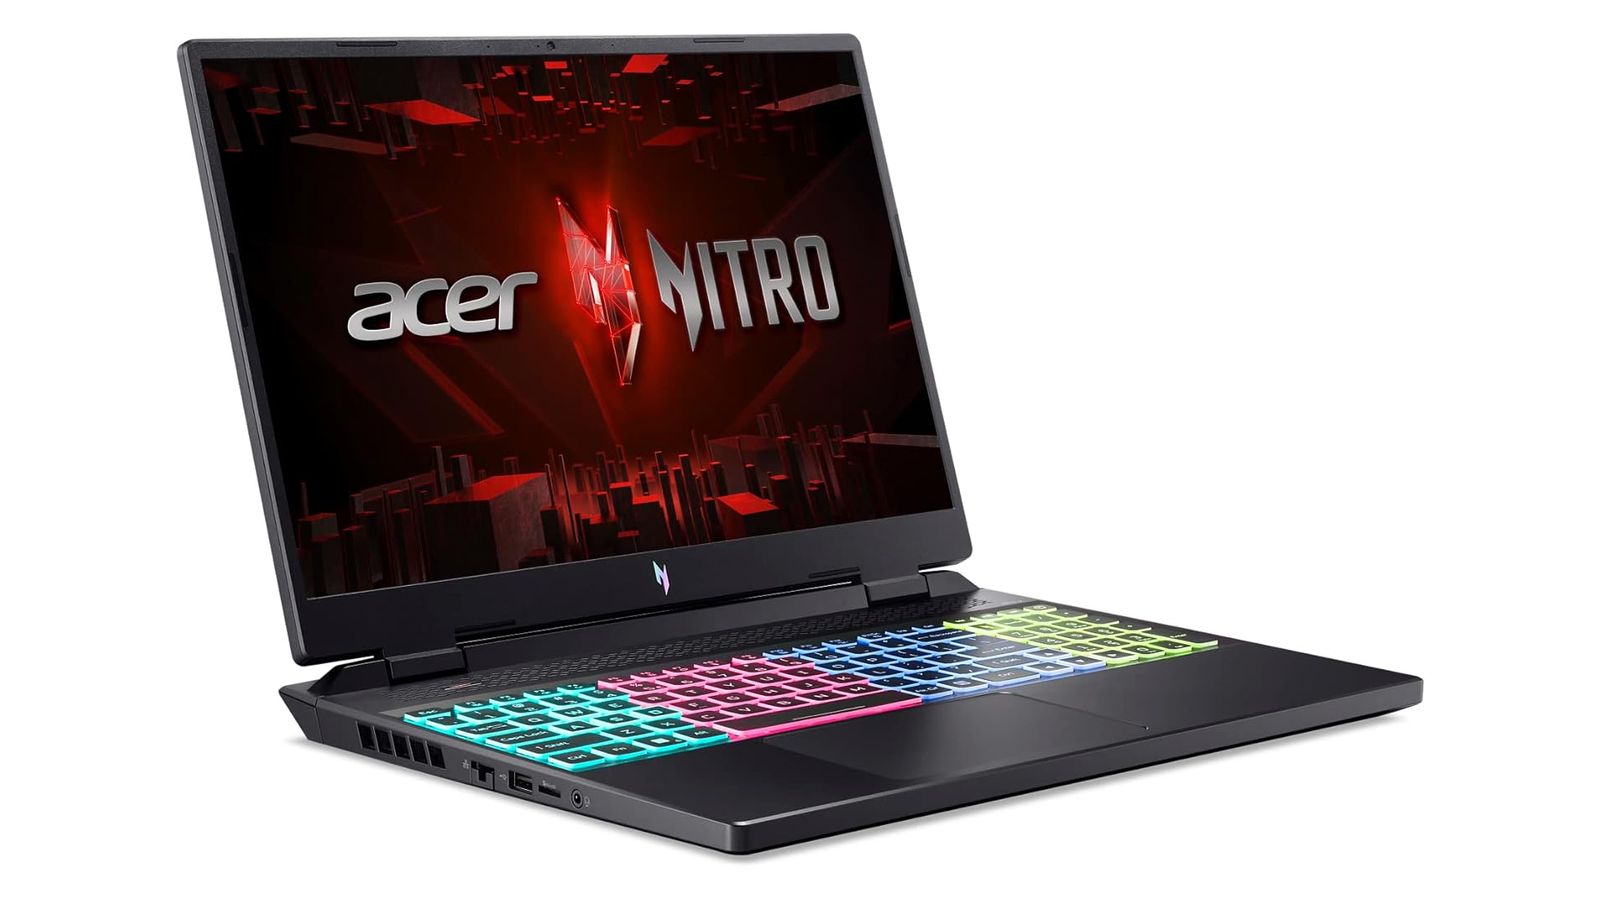 Acer Nitro 16 product image of a black laptop open with multicoloured backlit keys.